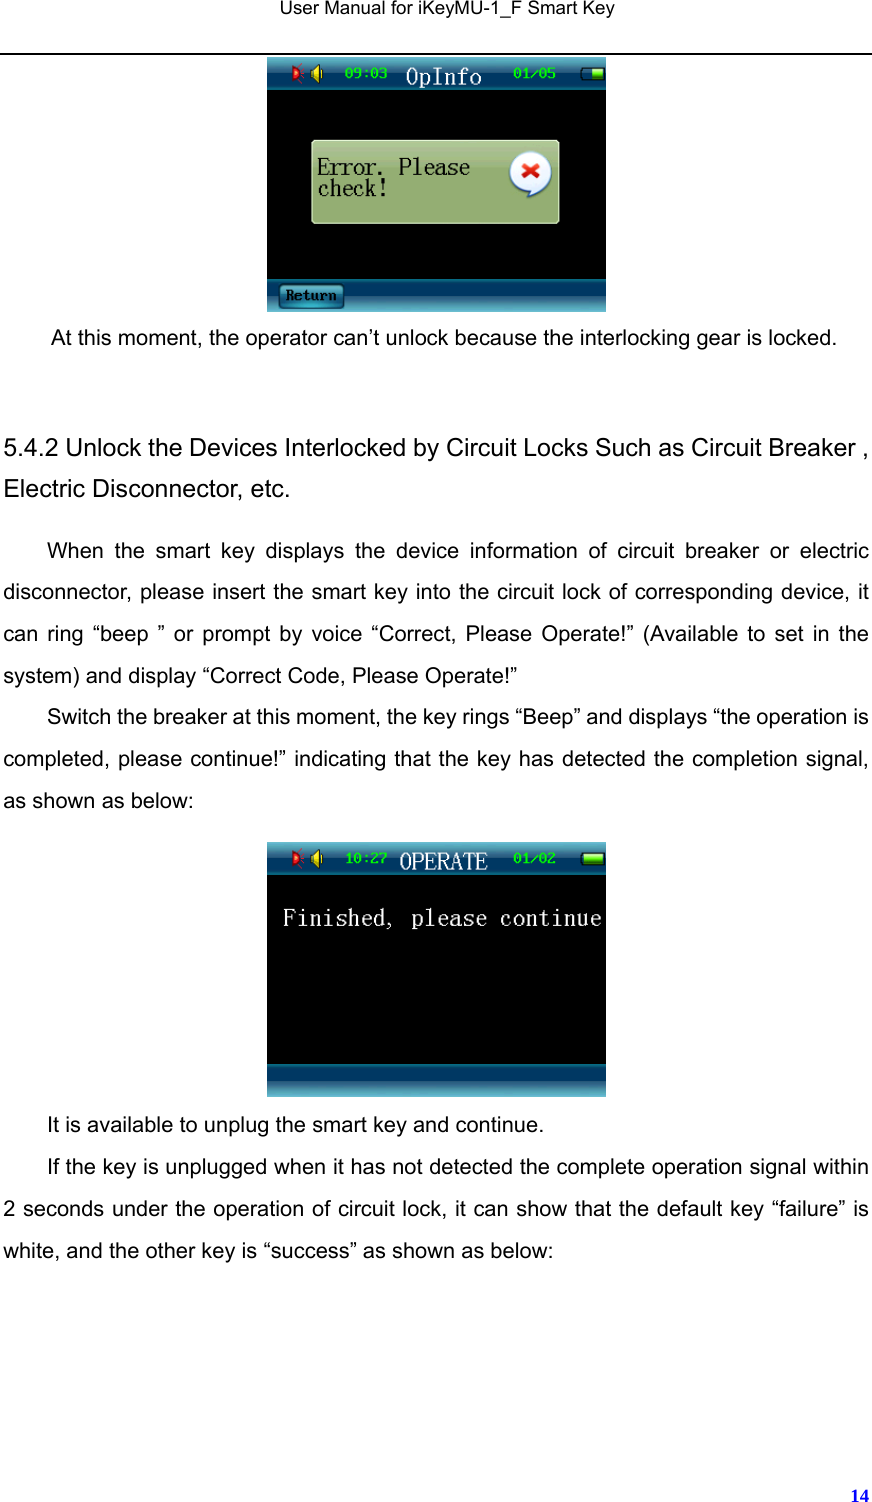   User Manual for iKeyMU-1_F Smart Key       14 At this moment, the operator can’t unlock because the interlocking gear is locked.  5.4.2 Unlock the Devices Interlocked by Circuit Locks Such as Circuit Breaker , Electric Disconnector, etc.   When the smart key displays the device information of circuit breaker or electric disconnector, please insert the smart key into the circuit lock of corresponding device, it can ring “beep ” or prompt by voice “Correct, Please Operate!” (Available to set in the system) and display “Correct Code, Please Operate!” Switch the breaker at this moment, the key rings “Beep” and displays “the operation is completed, please continue!” indicating that the key has detected the completion signal, as shown as below:     It is available to unplug the smart key and continue.   If the key is unplugged when it has not detected the complete operation signal within 2 seconds under the operation of circuit lock, it can show that the default key “failure” is white, and the other key is “success” as shown as below: 